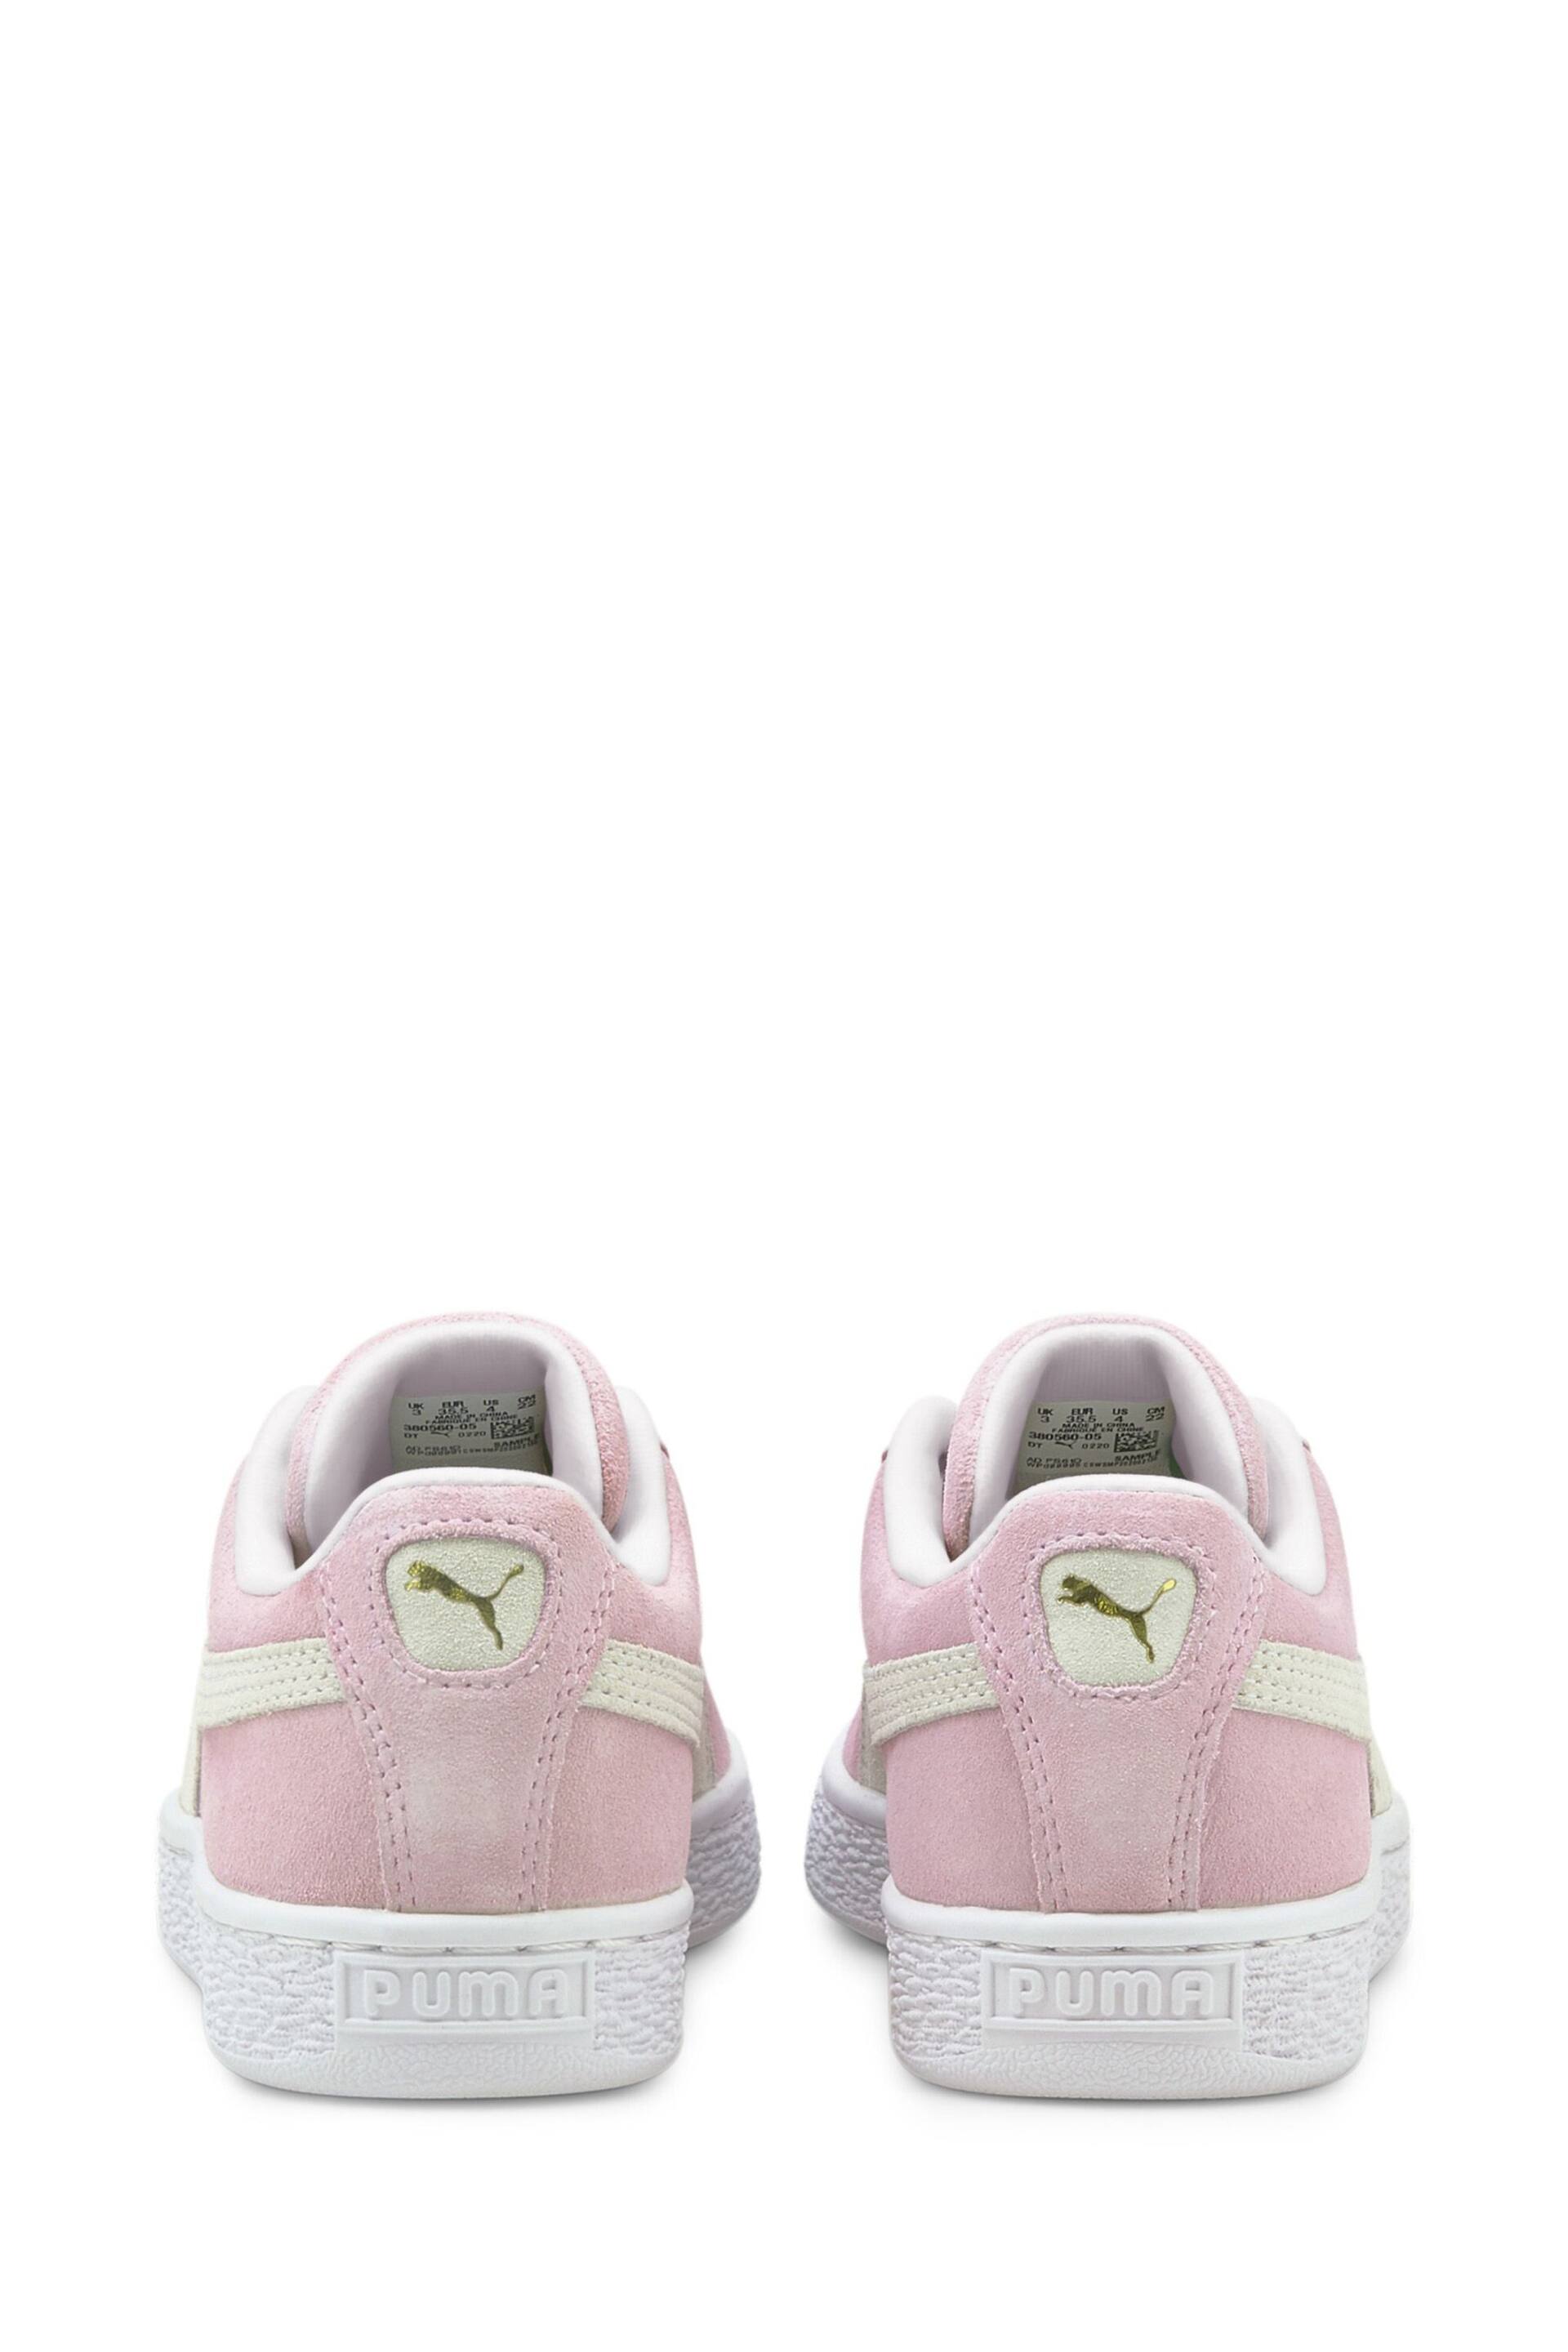 Puma Pink Suede Classic XXI Youth Trainers - Image 2 of 7